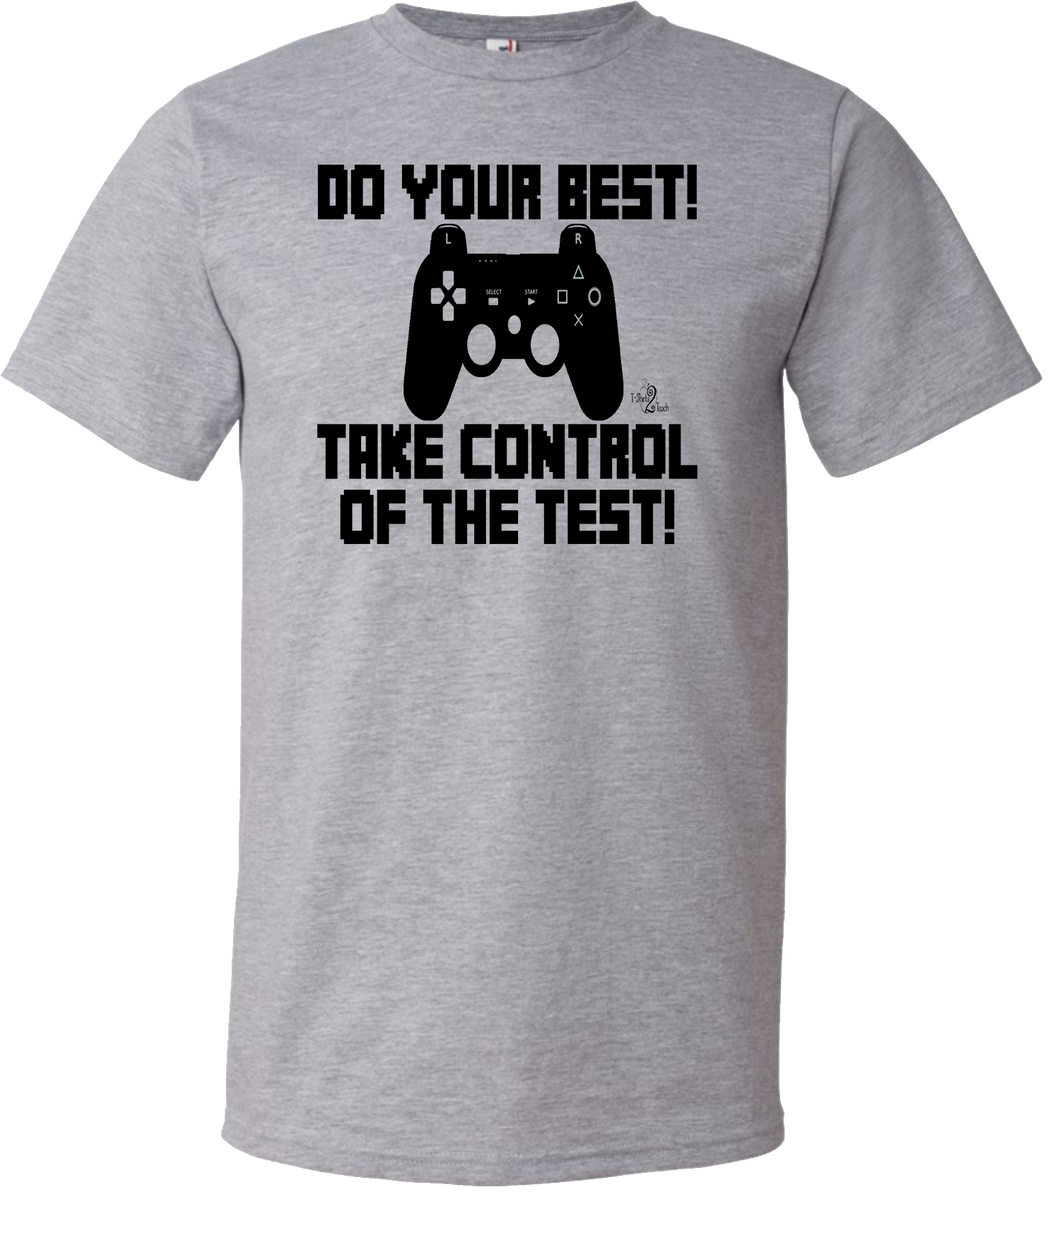 Take Control of the Test Testing Tee (Only Size Small and 3X)